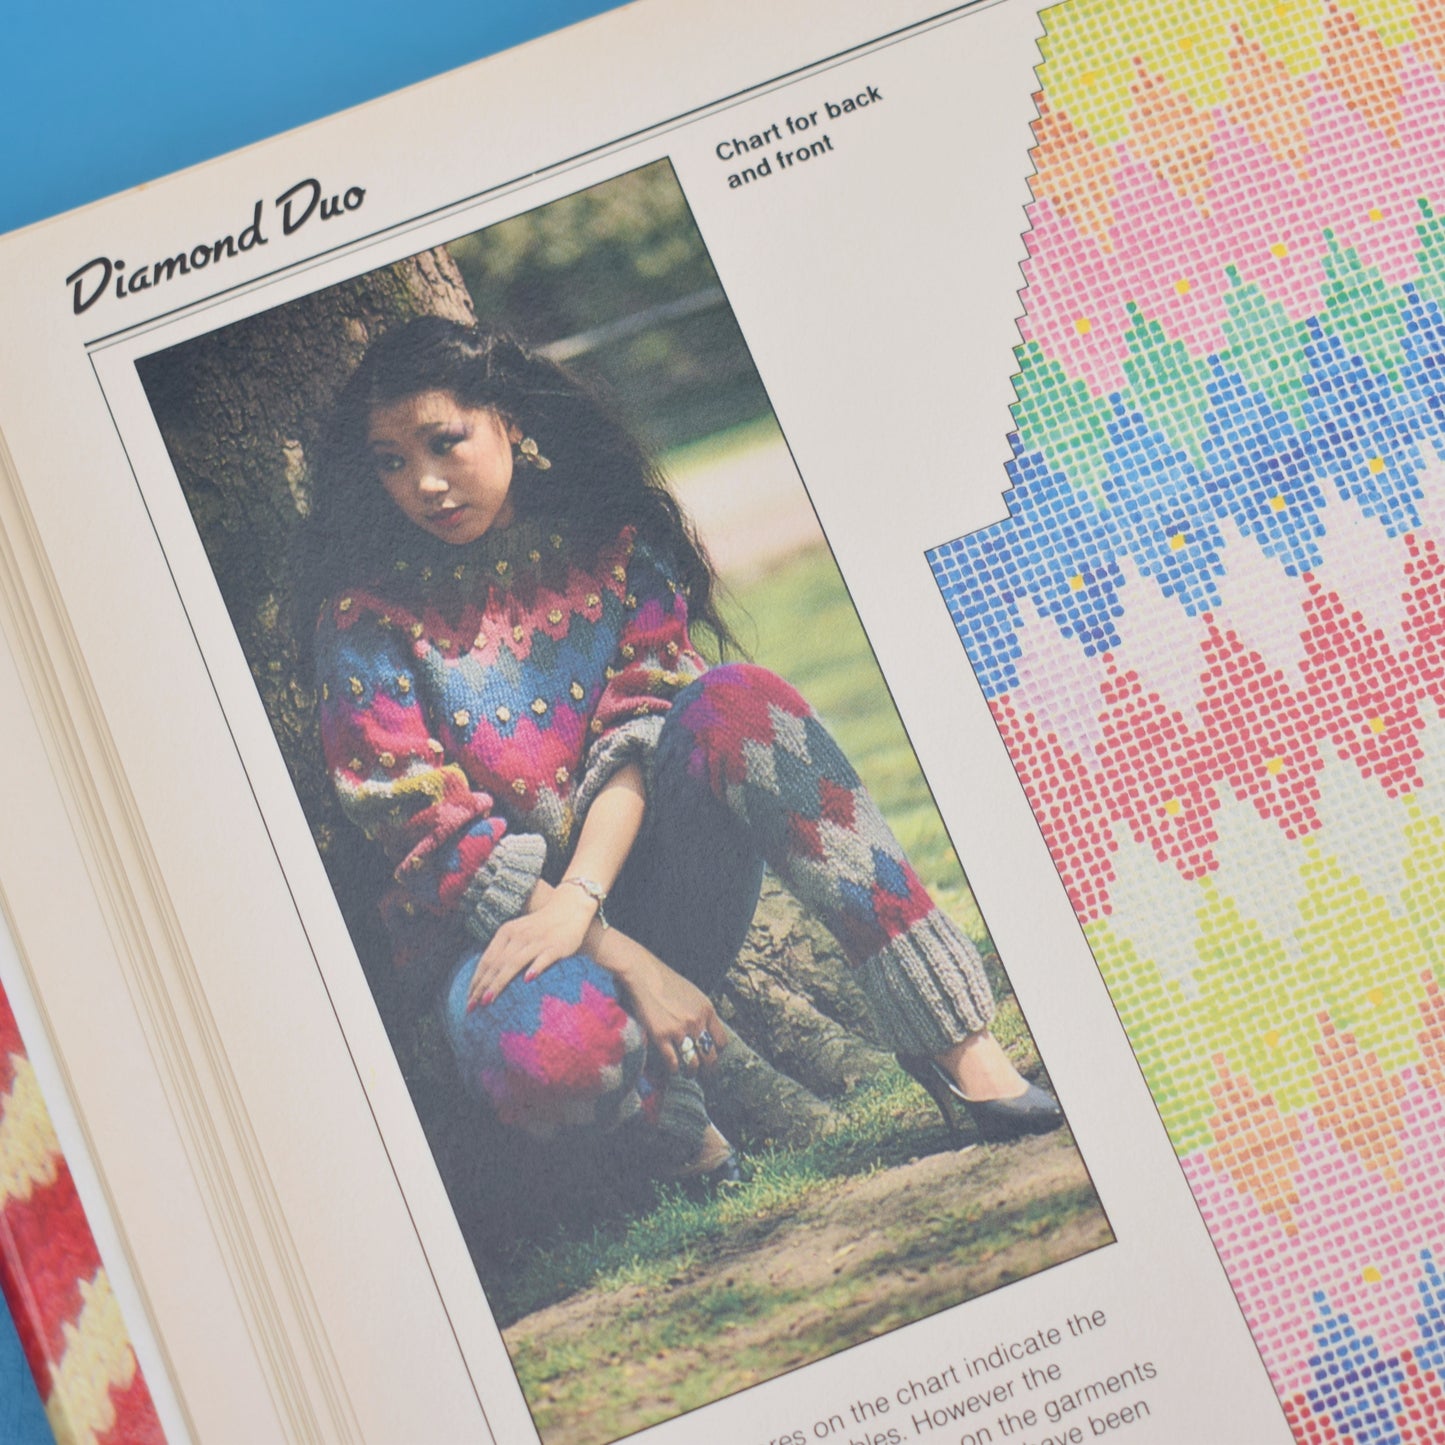 Vintage 1980s Book - The Sweater Book